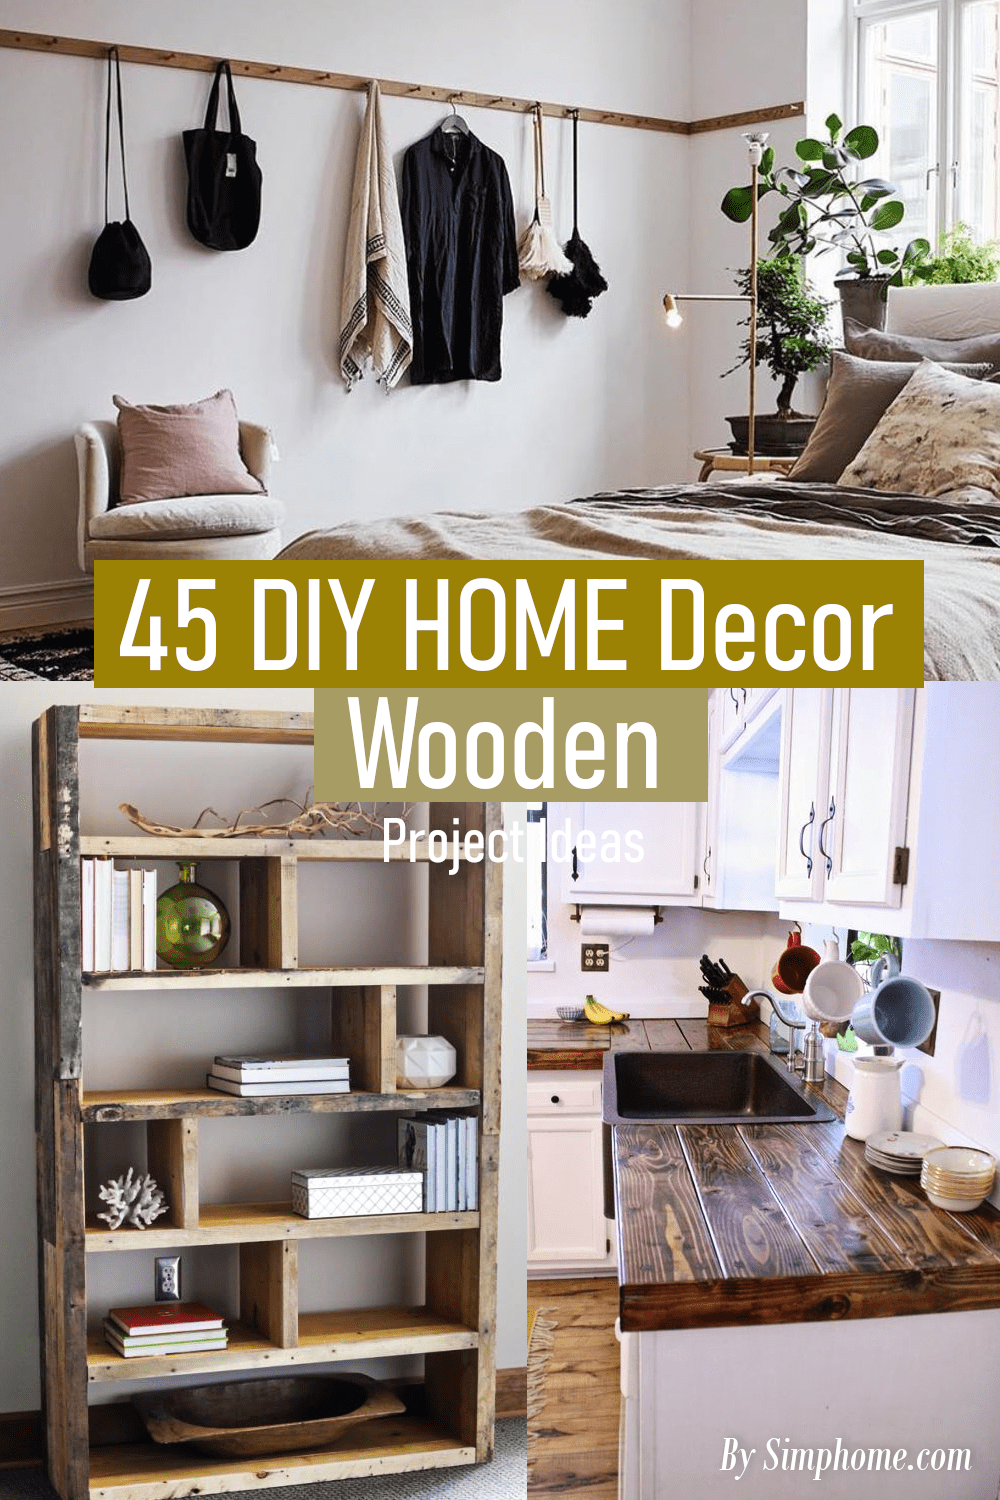 45 DIY Home Decor Wooden Projects via Simphome.com ..Featured